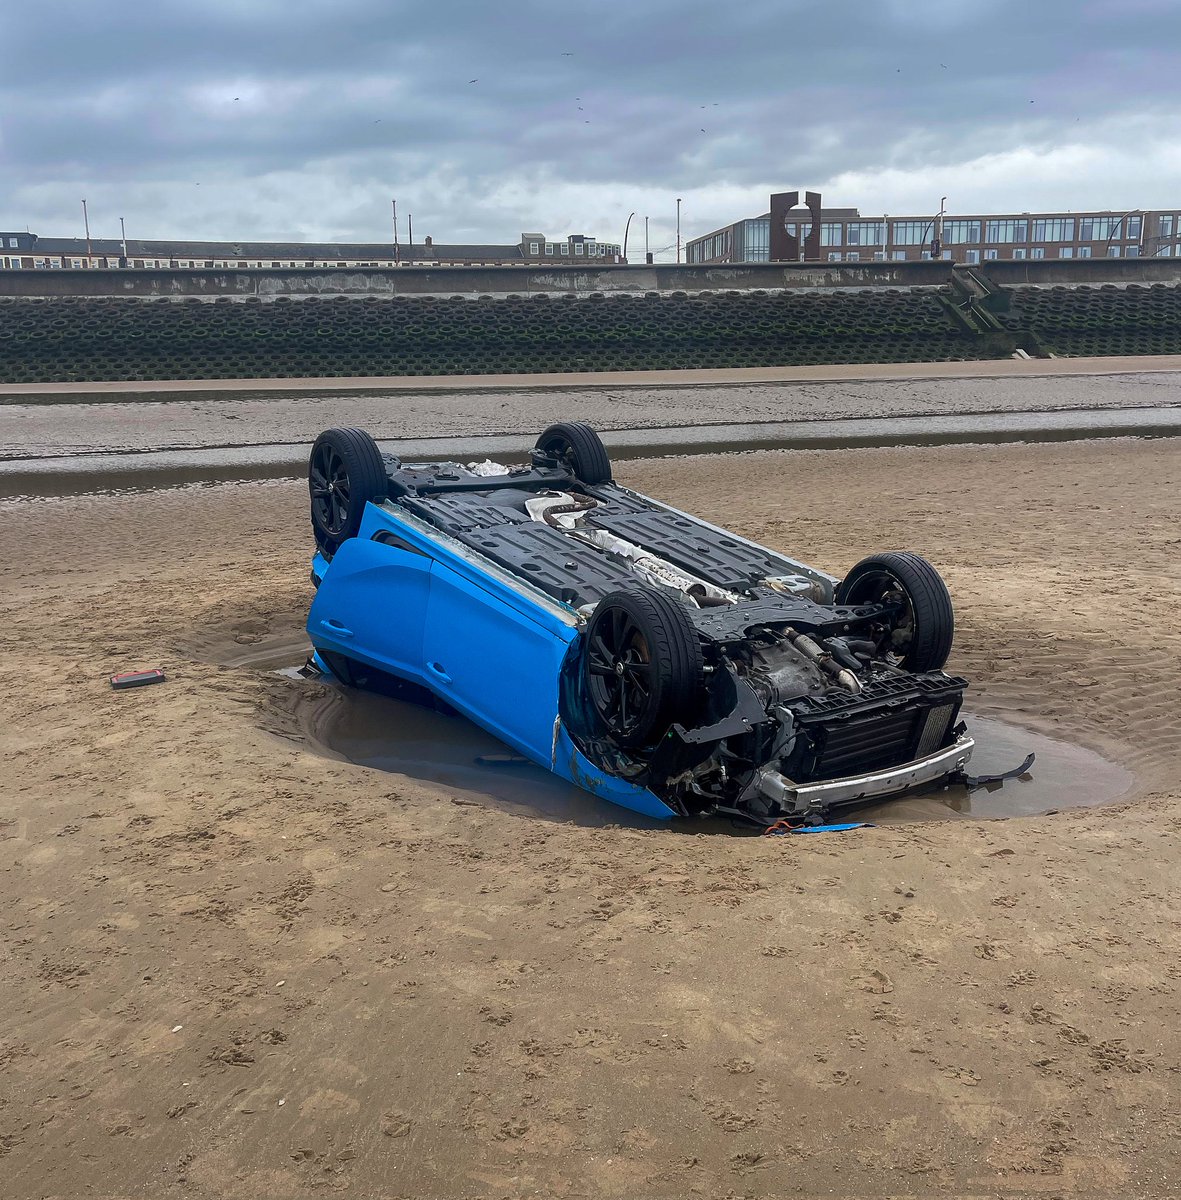 I wouldn't advise anyone to go driving their car's on the beach here in Blackpool #Blackpoolcouncil #stuck #Blackpool #Blackpoolbeach #beach #recovery #car #rightoff #fyldecoast